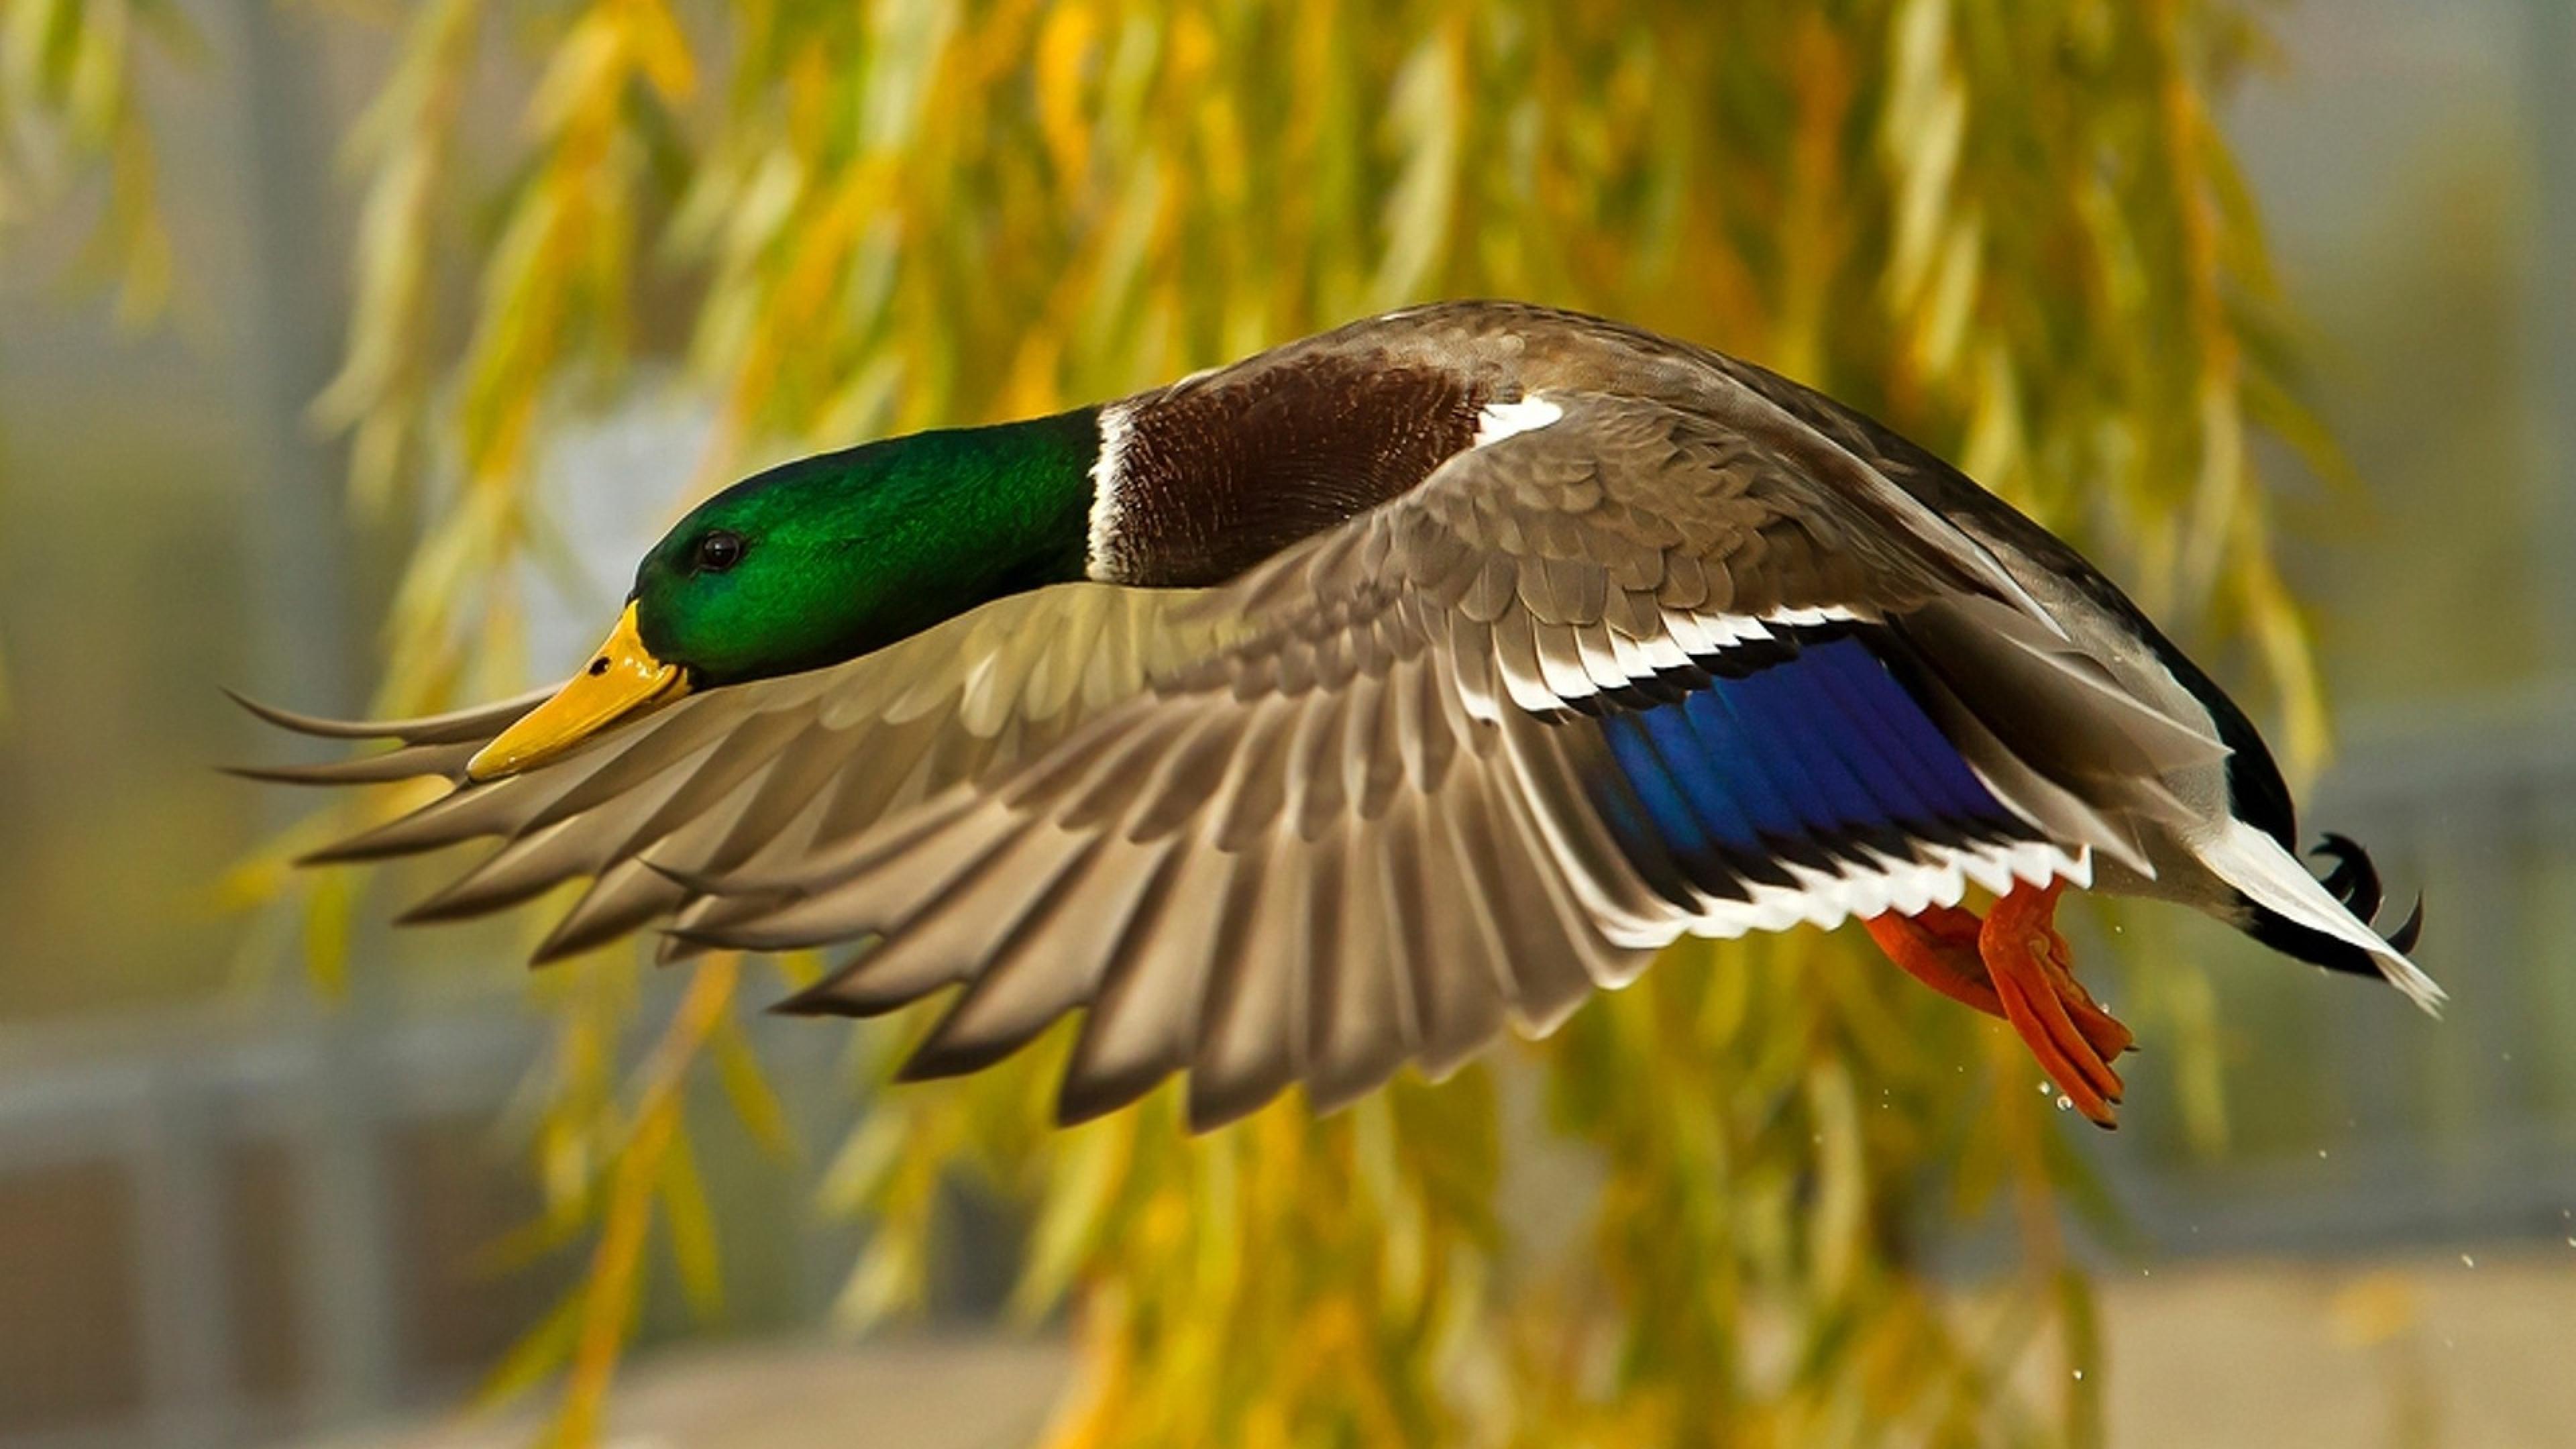 Mallard Duck Flying HD Wallpaper Download For Mobile And Computer 3840 X2160, Wallpaper13.com